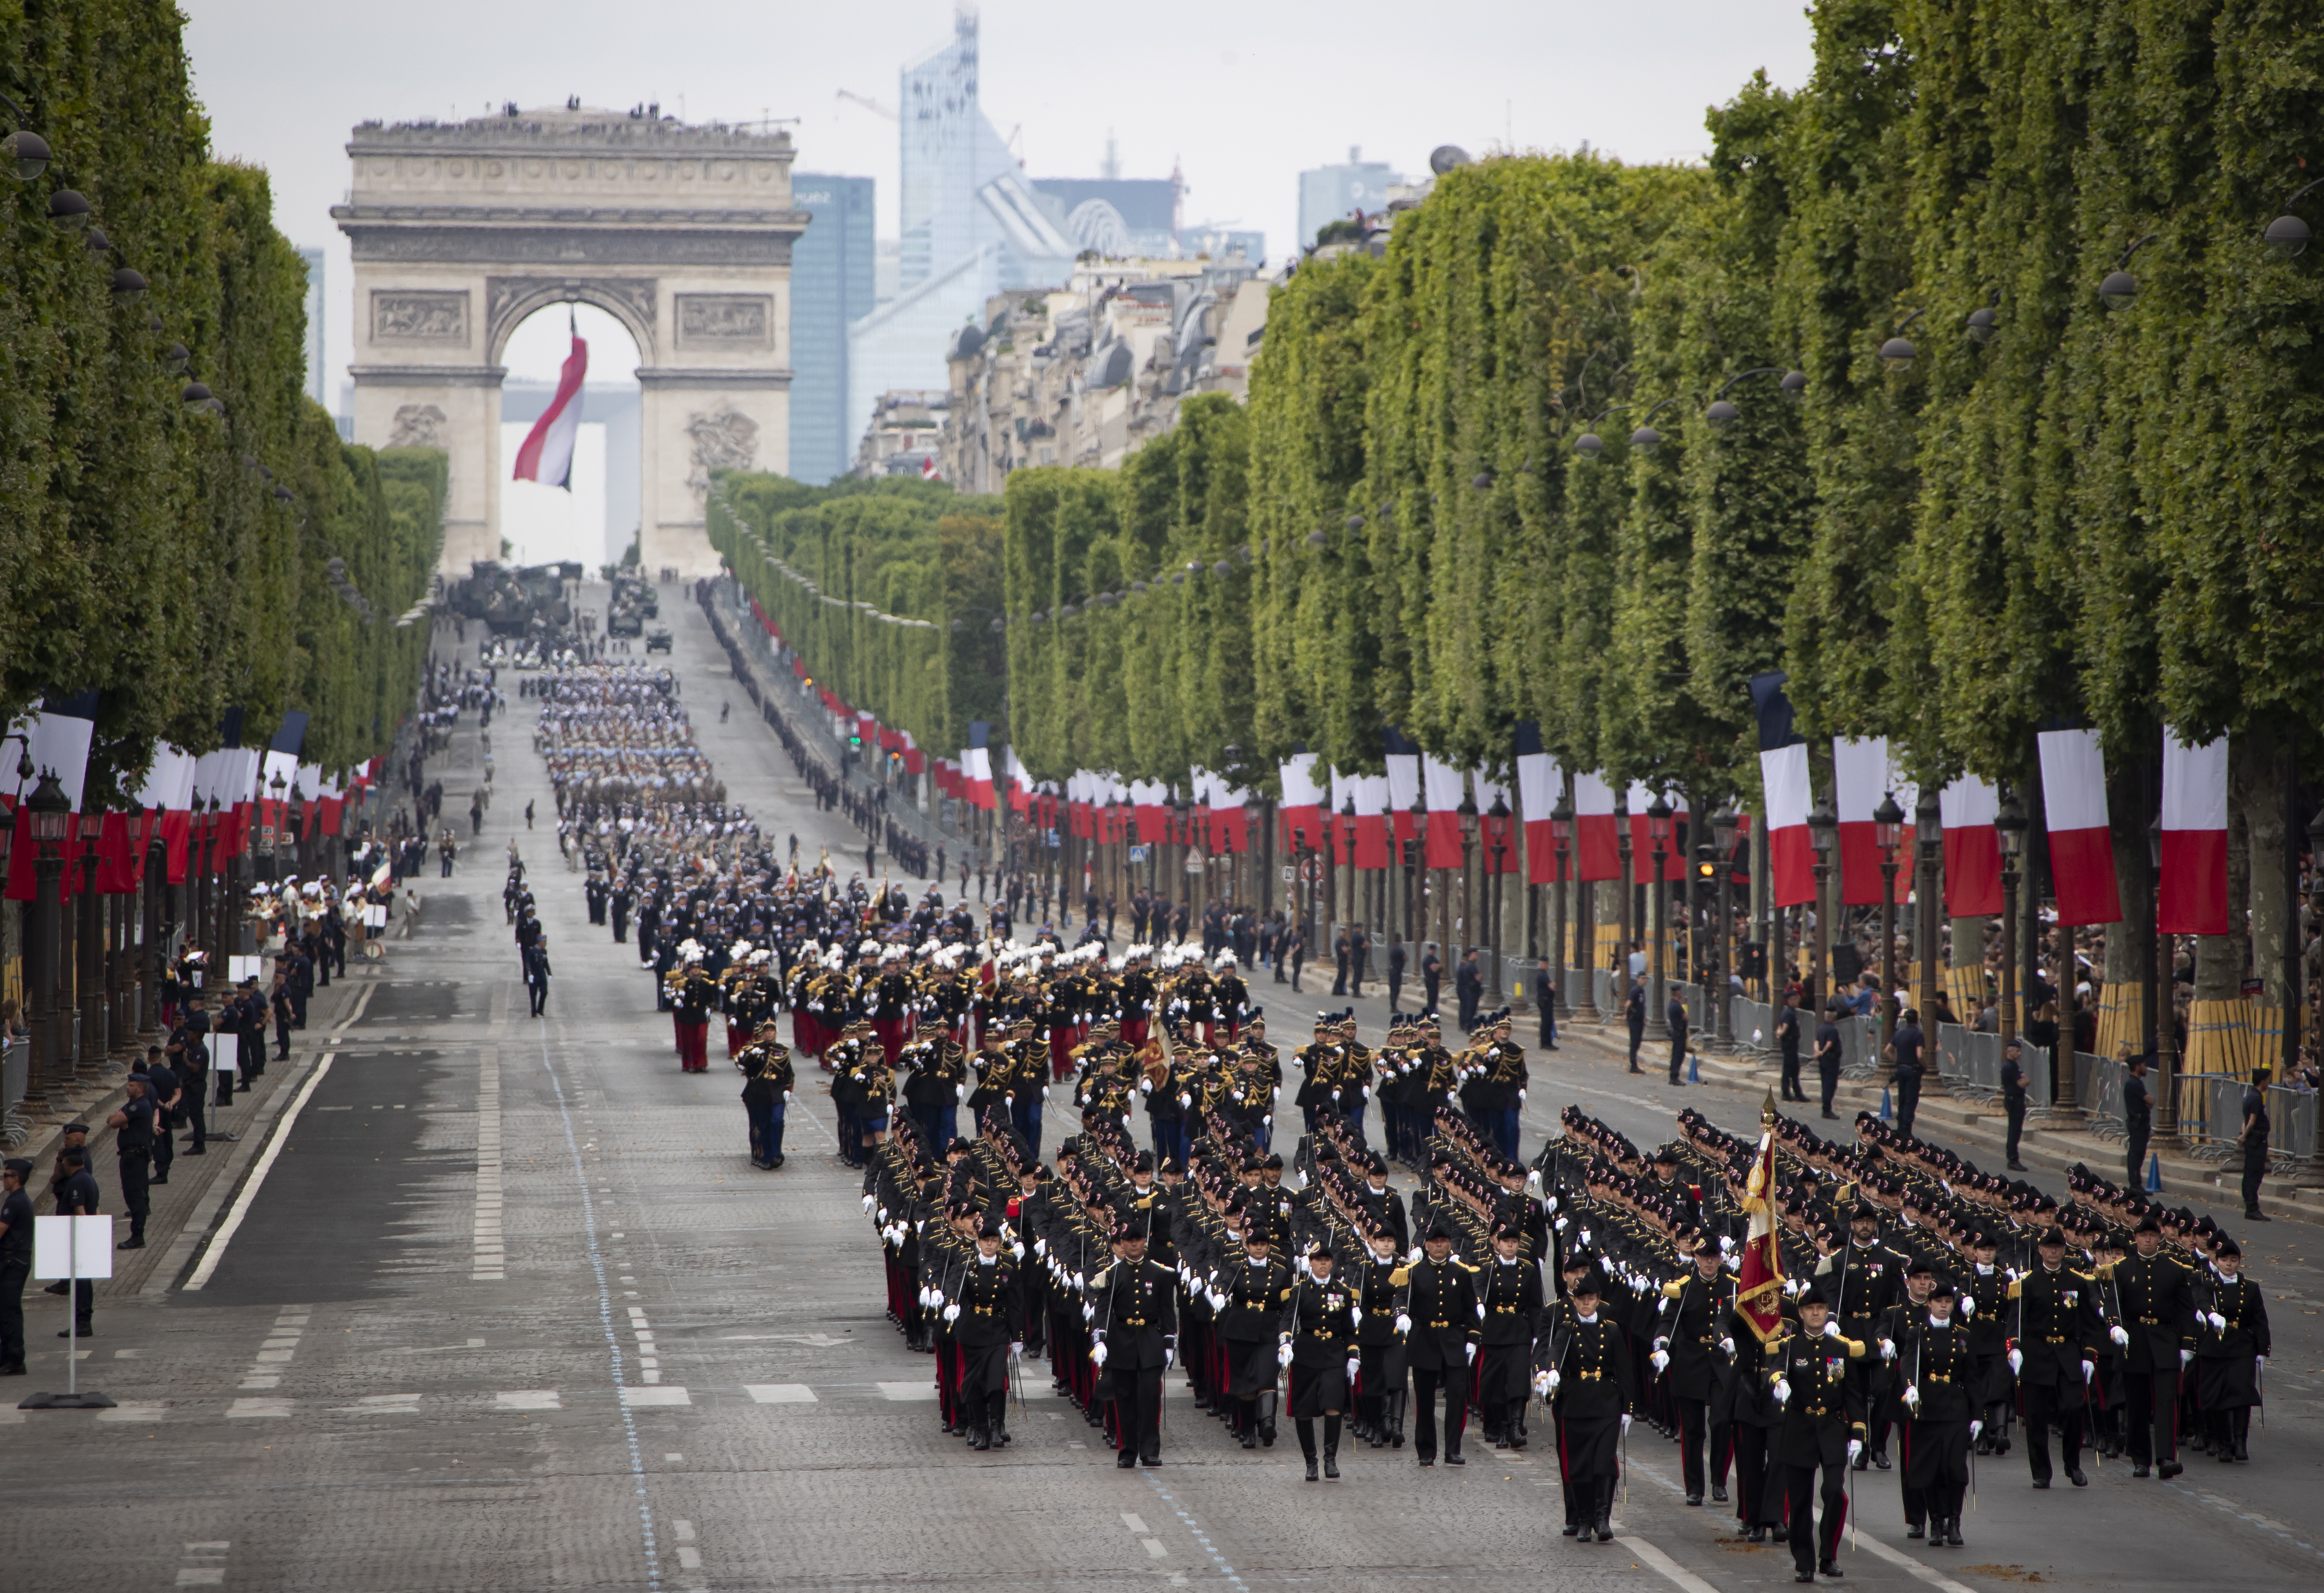 epa07716192 A general view of troops marching during the annual Bastille Day military parade on the Champs Elysees avenue in Paris, France, 14 July 2019. Bastille Day, the French National Day, is held annually on 14 July to commemorate the storming of the Bastille fortress in 1789.  EPA/IAN LANGSDON